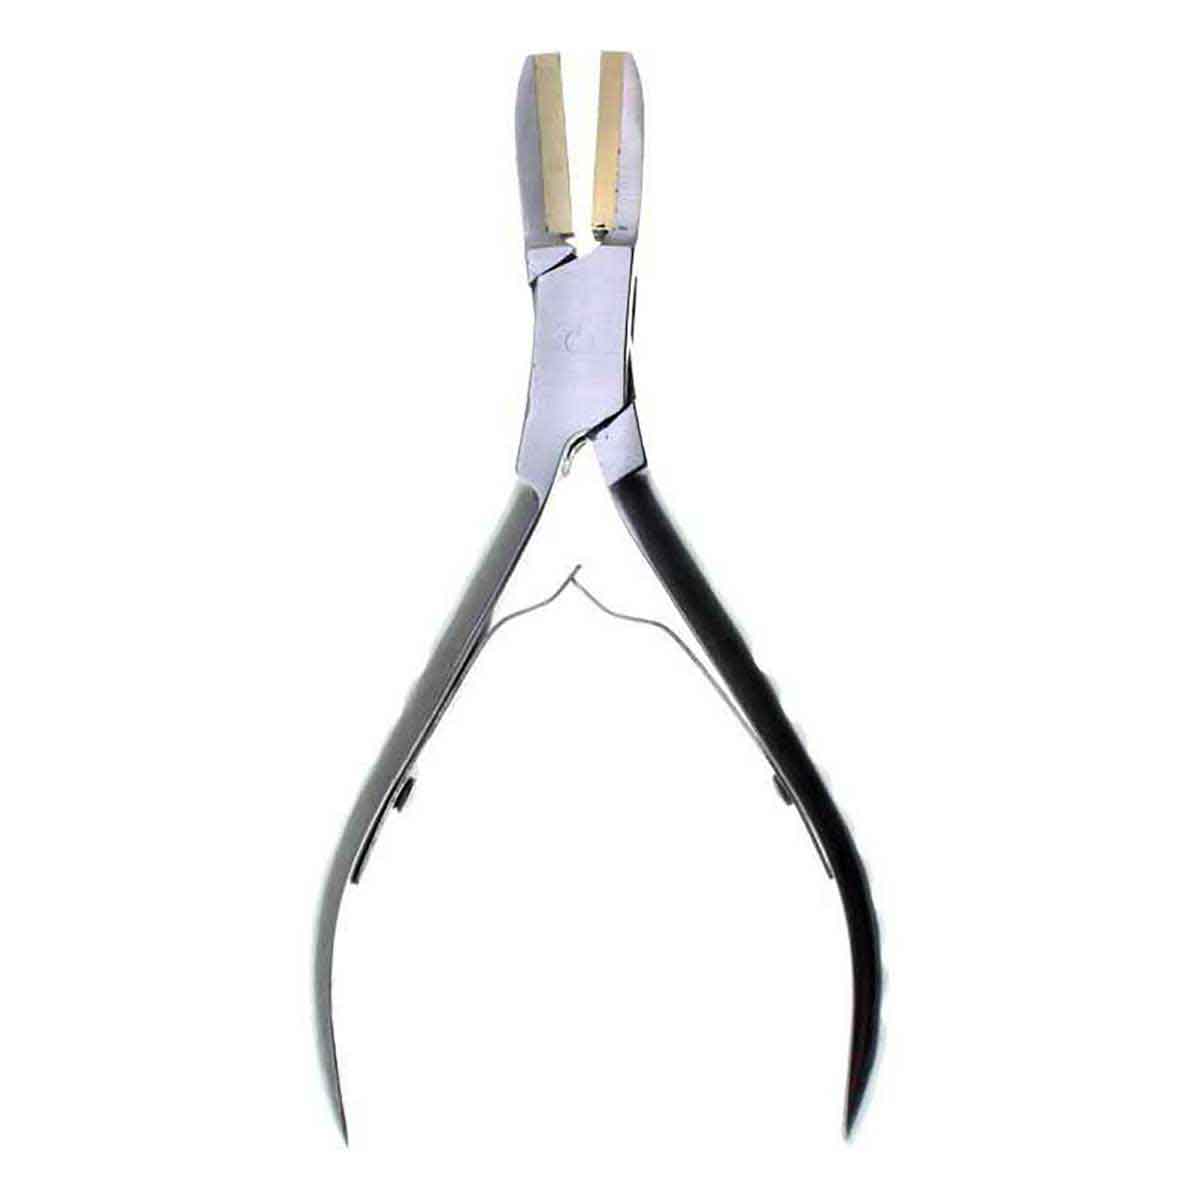 Flat Nose Pliers - Brass Lined Jaws - 5 1/2 inch